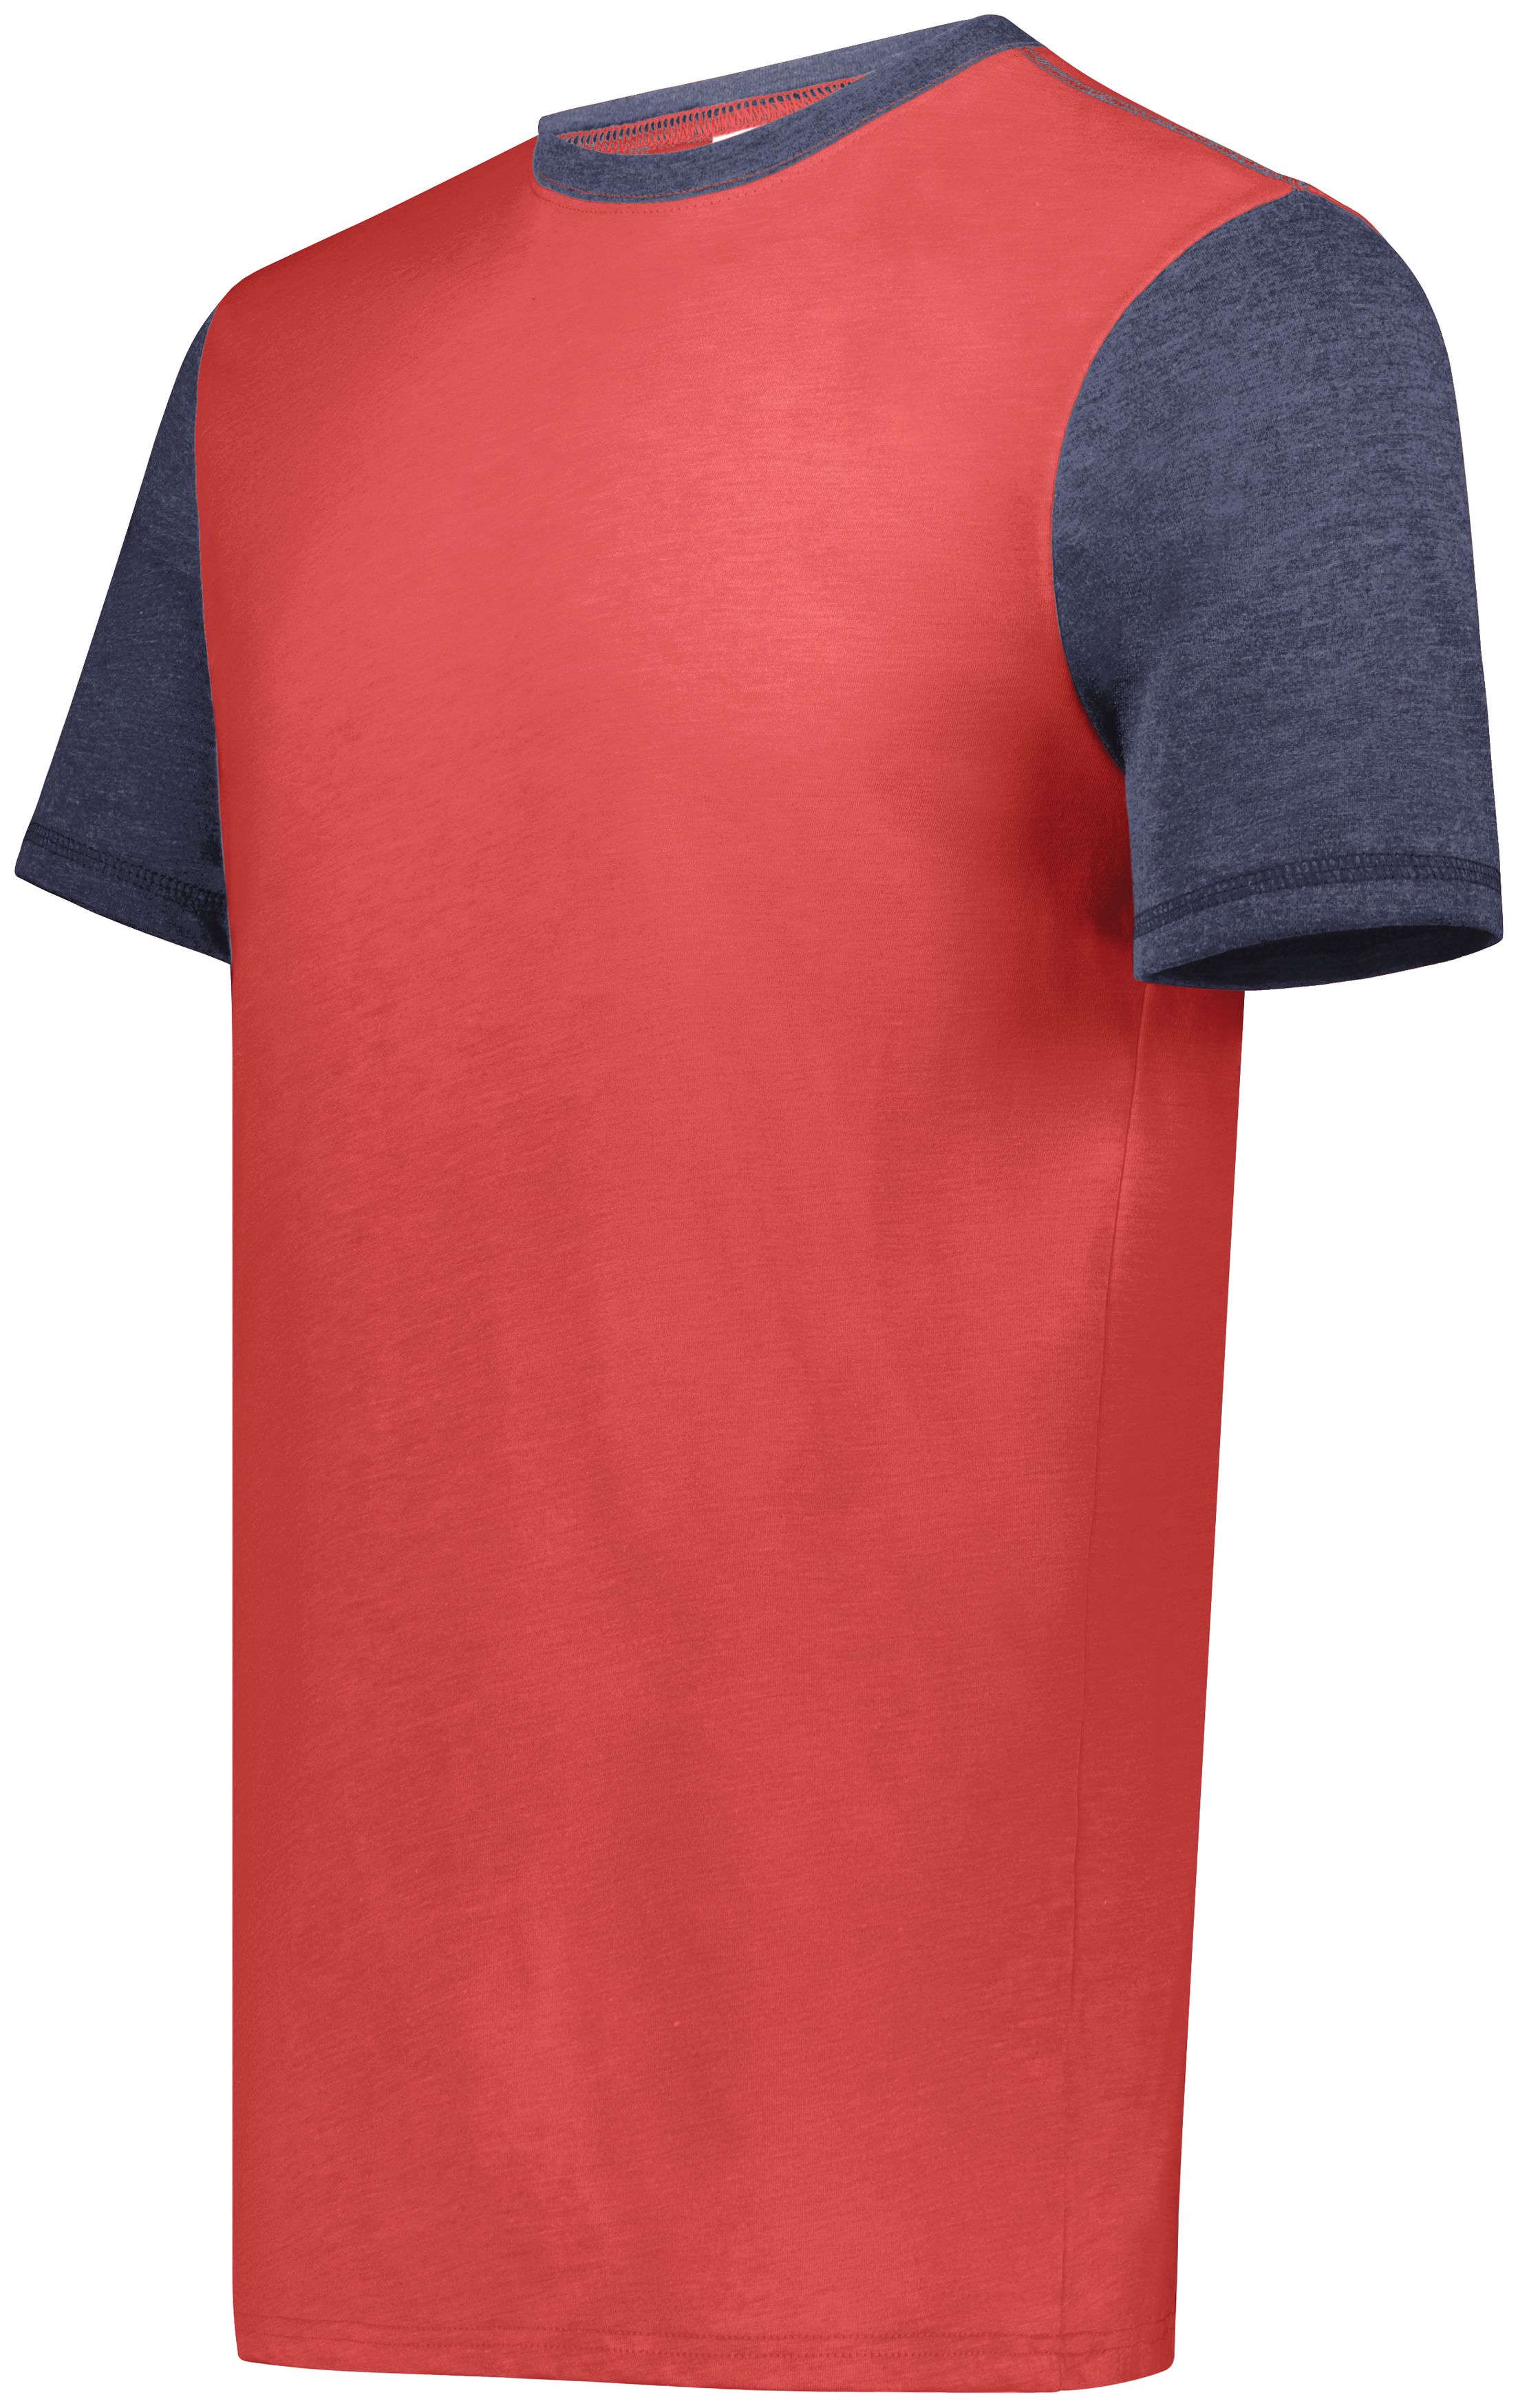 click to view Scarlet Heather/Navy Heather